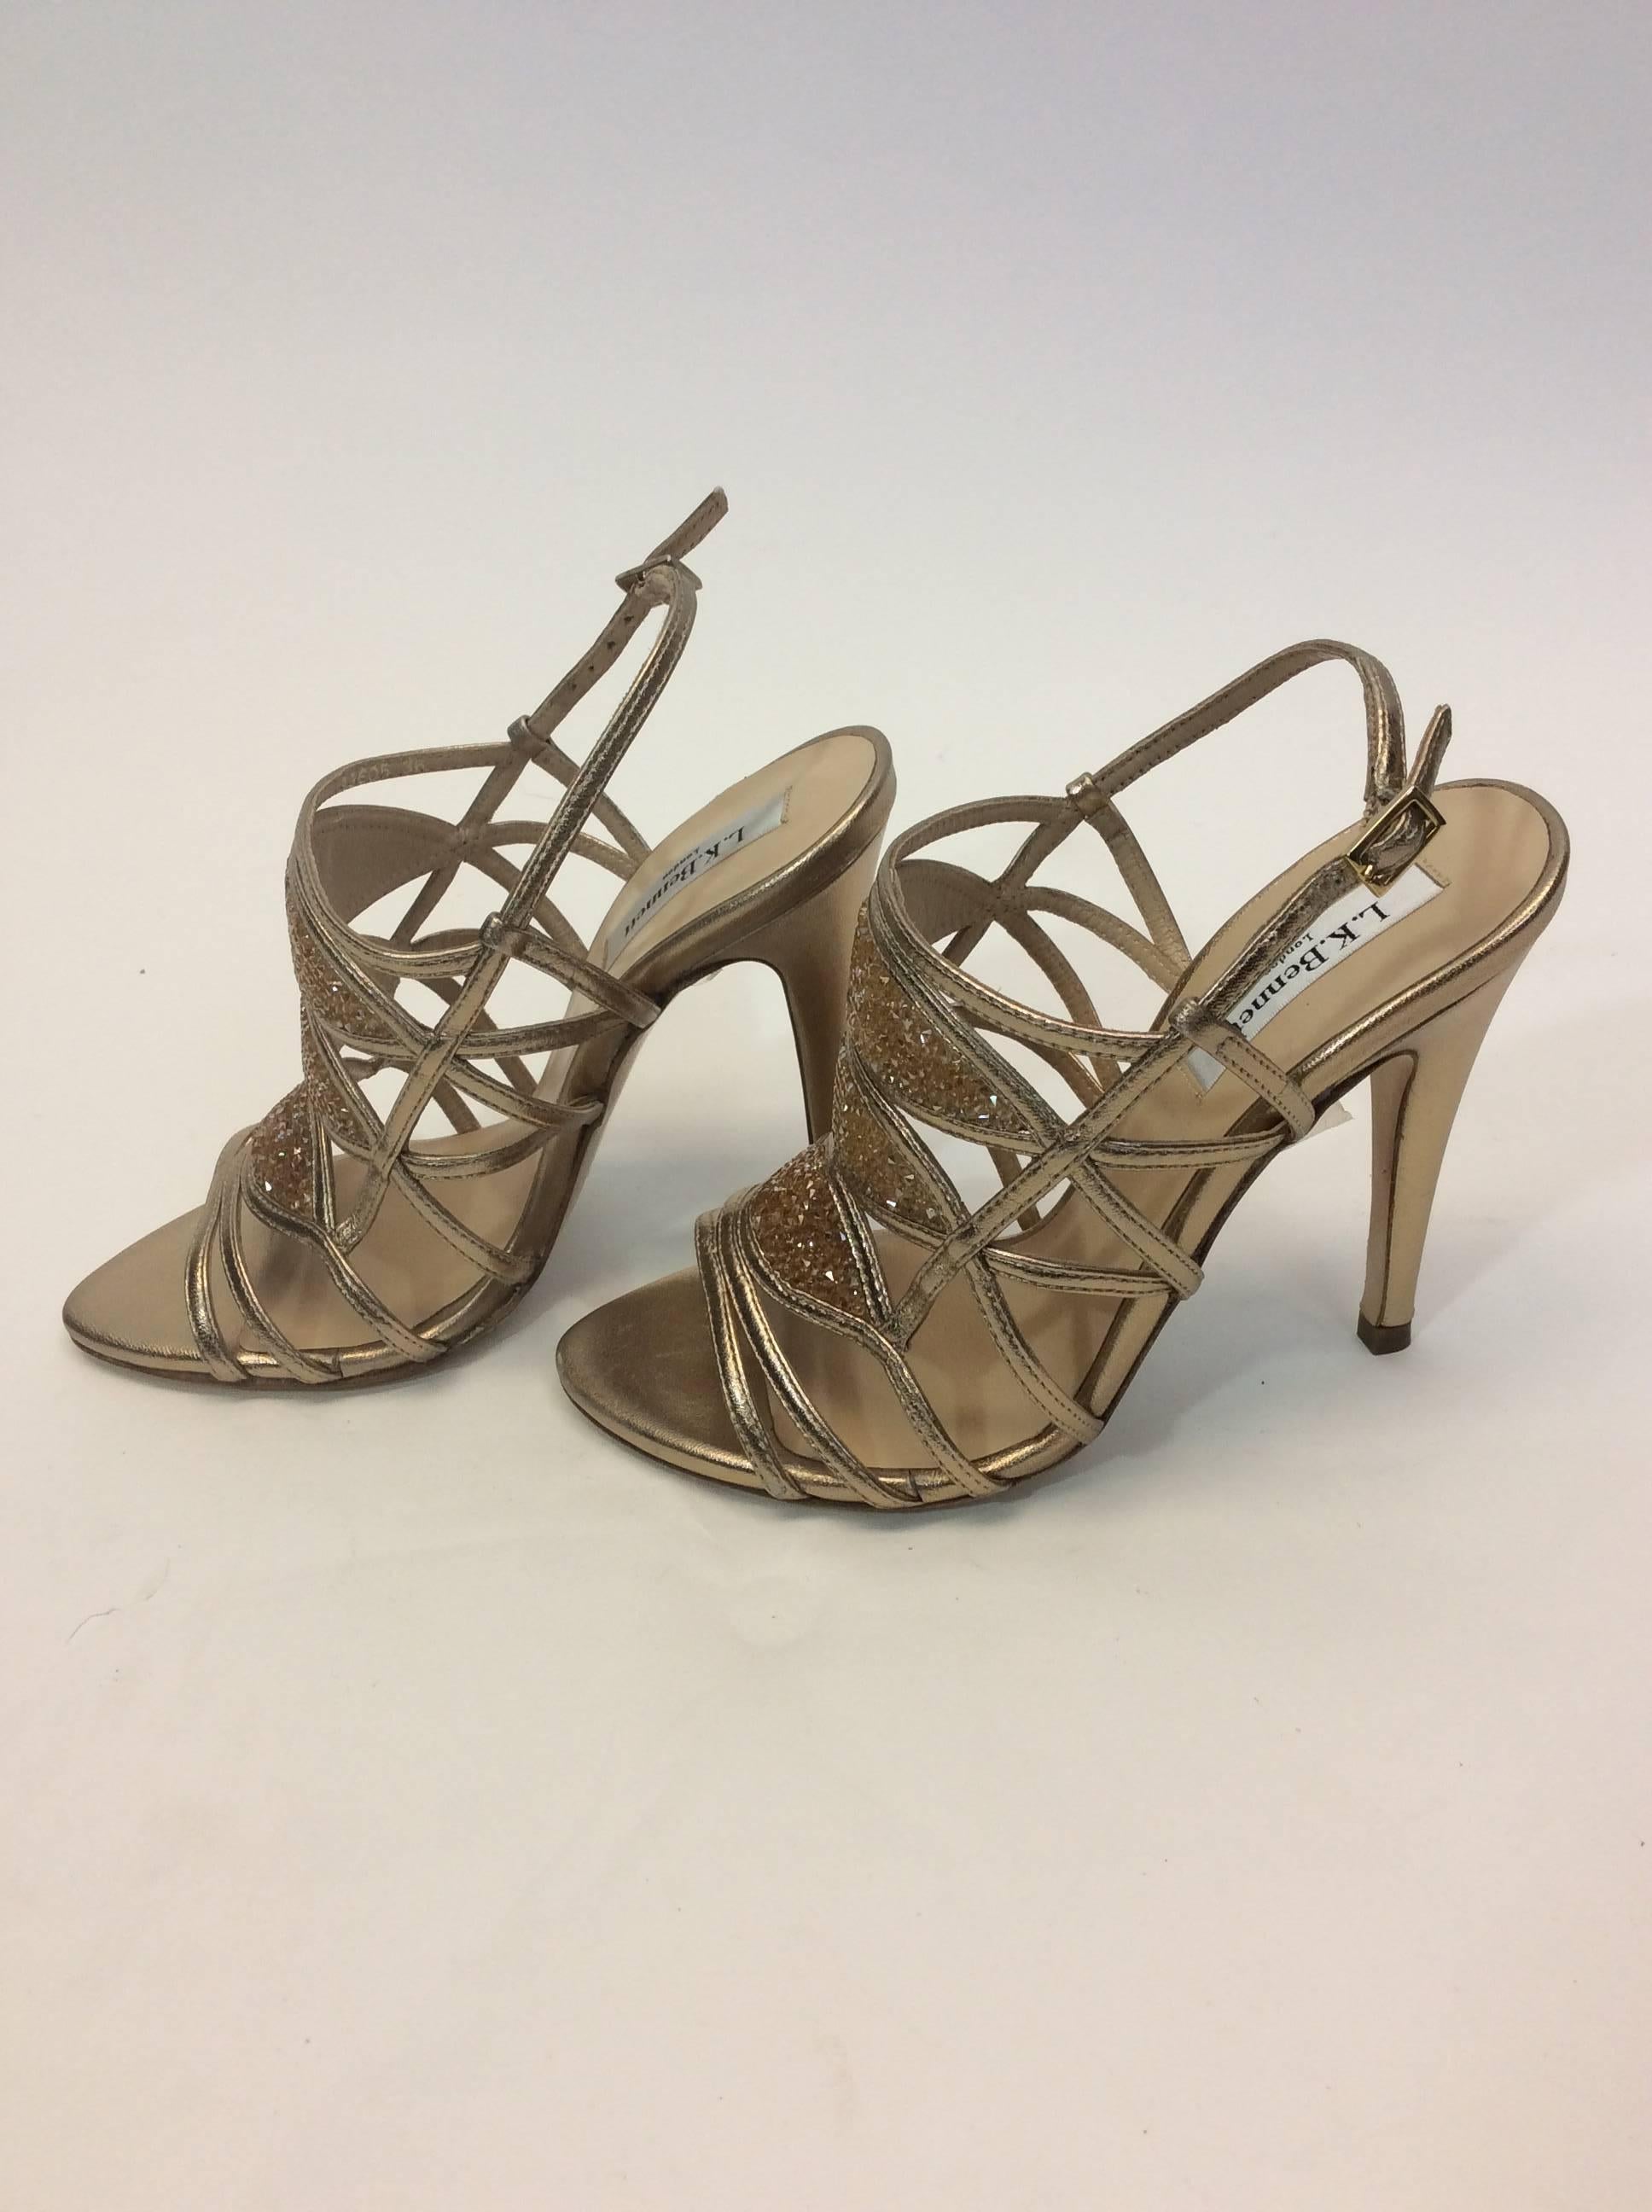 LK Bennett Gold Beaded Sandal In Excellent Condition For Sale In Narberth, PA